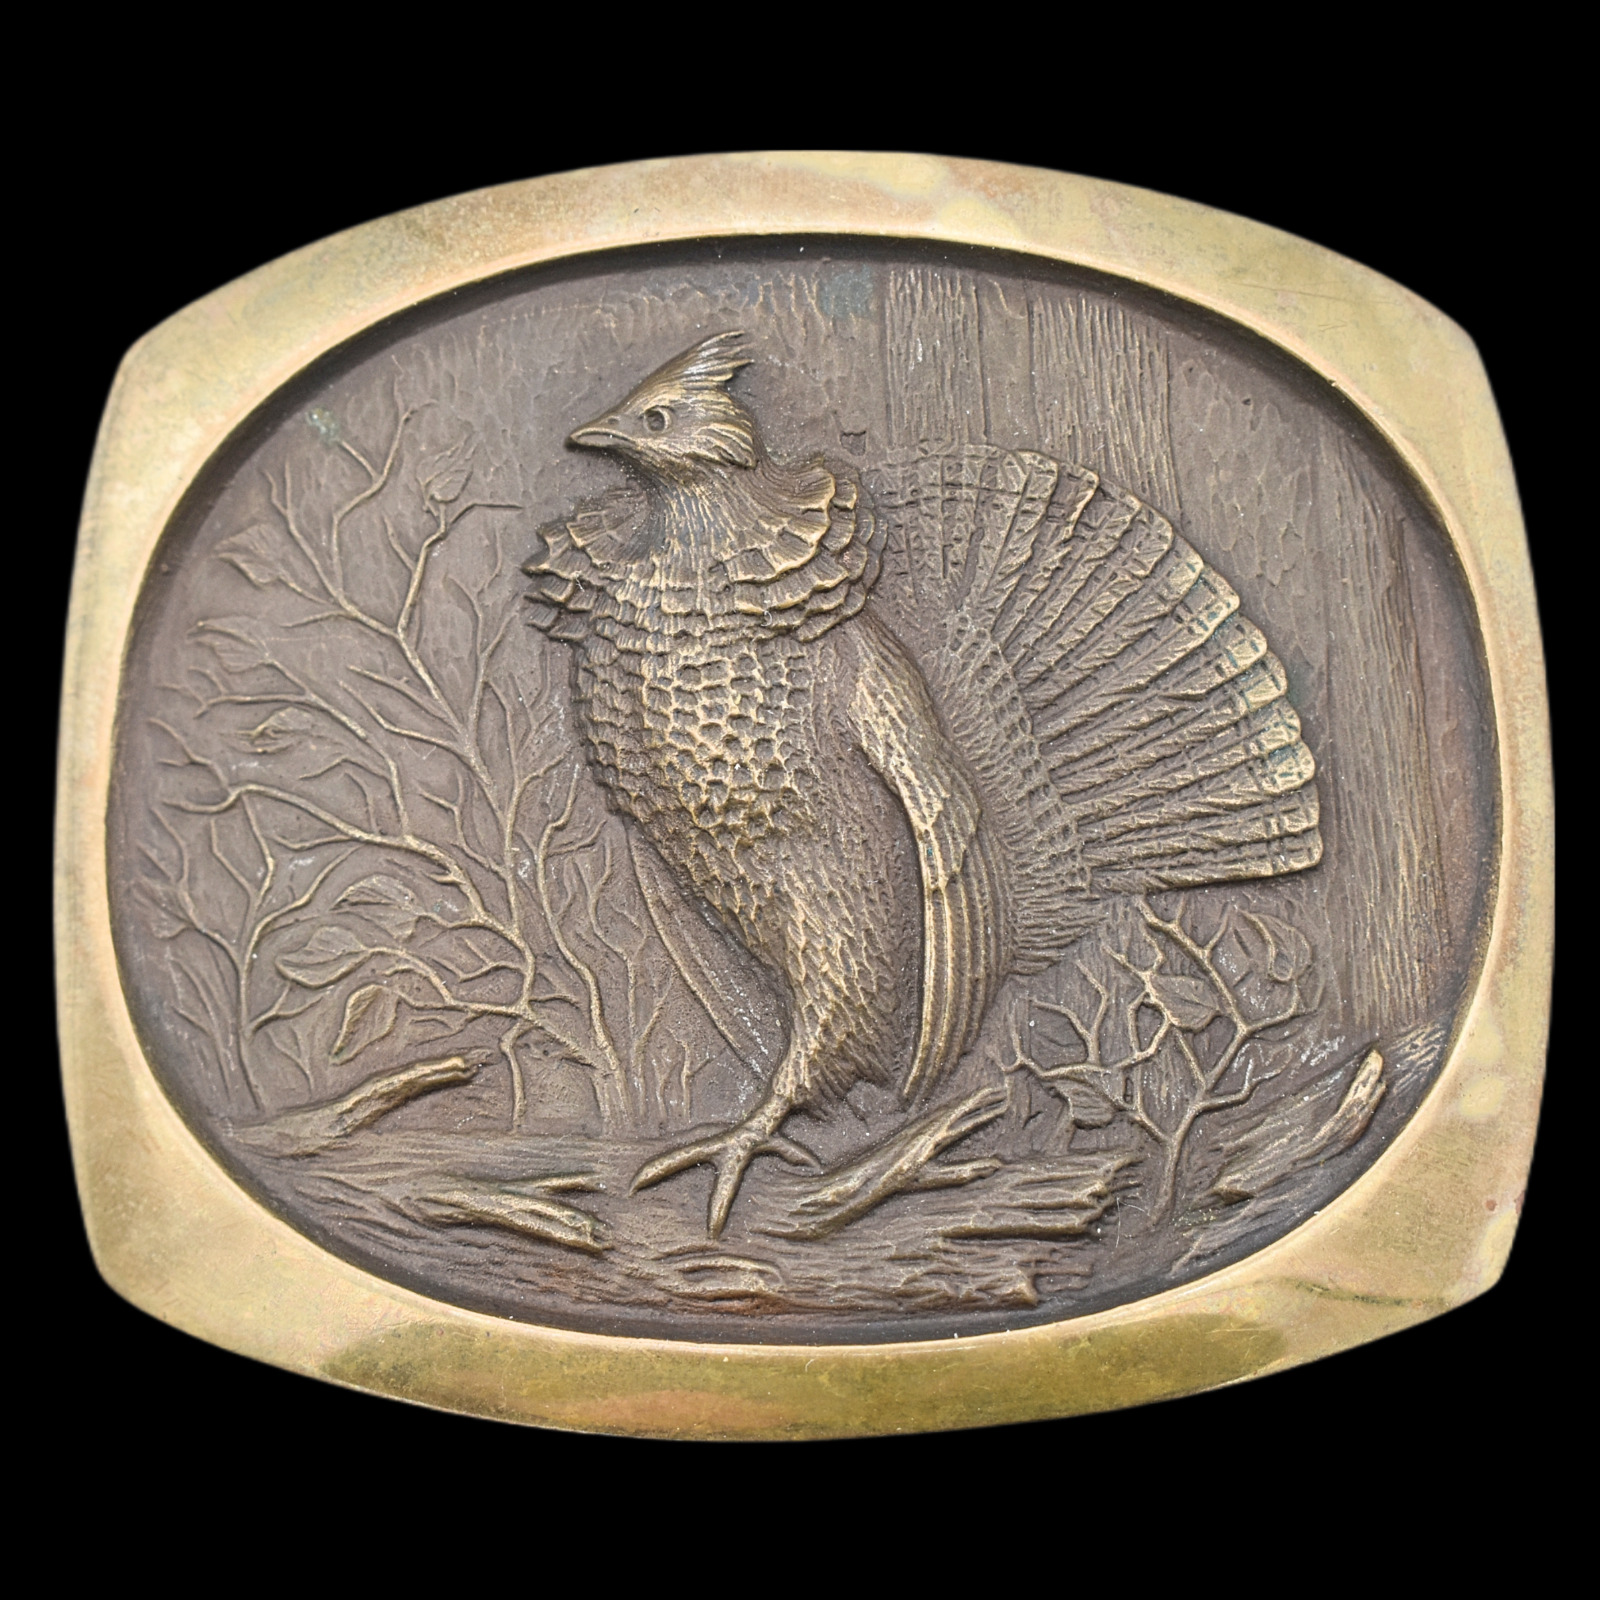 S.L. Knight Solid Bronze Ruffed Grouse Game Bird Hunter Vintage Belt Buckle